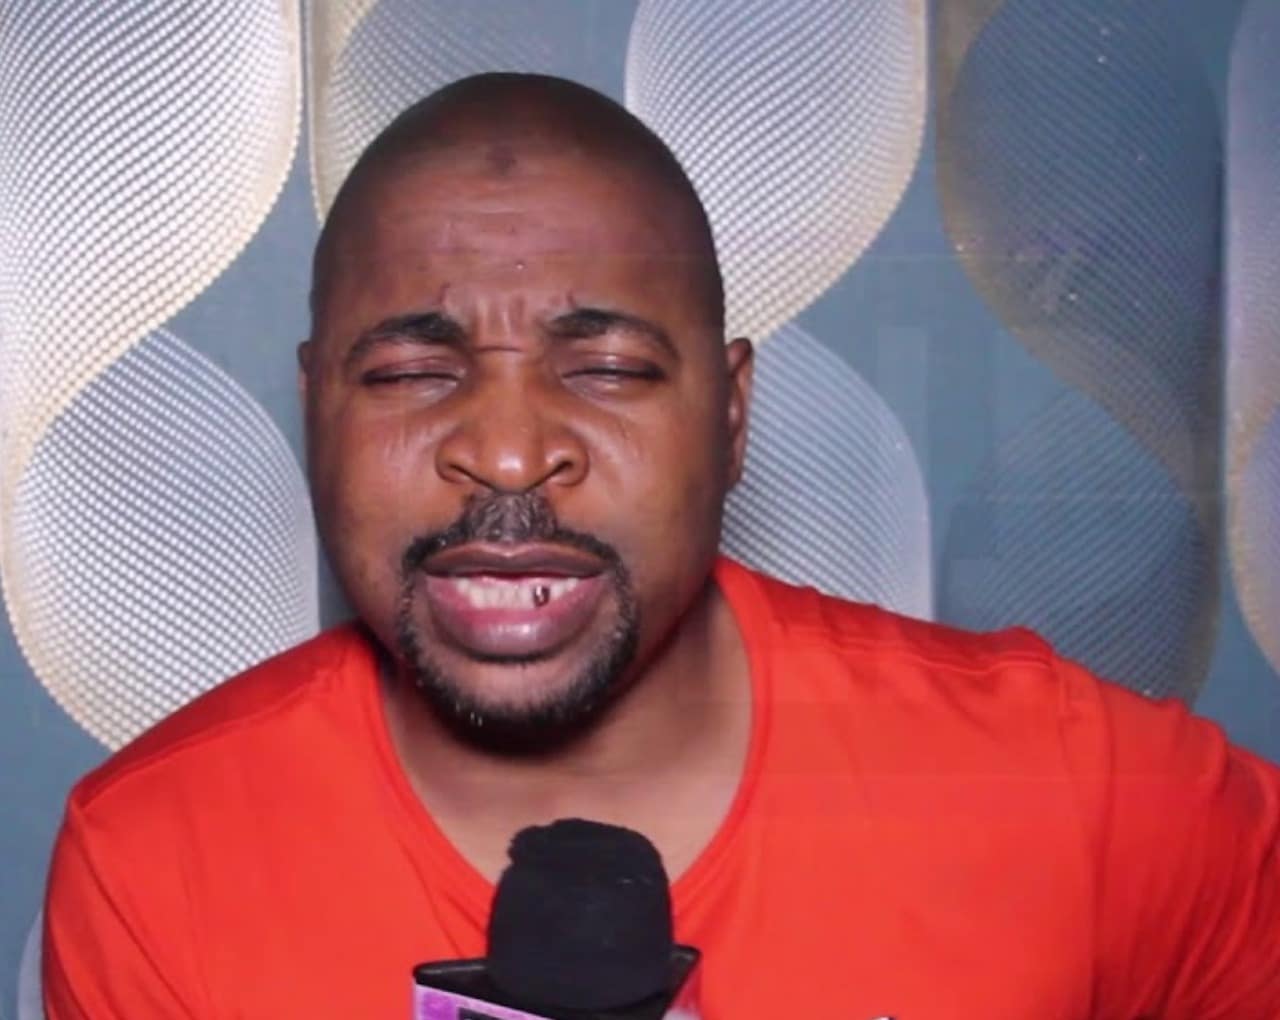 Lagos election: 'Igbos should stay indoor comment' a joke - MC Oluomo